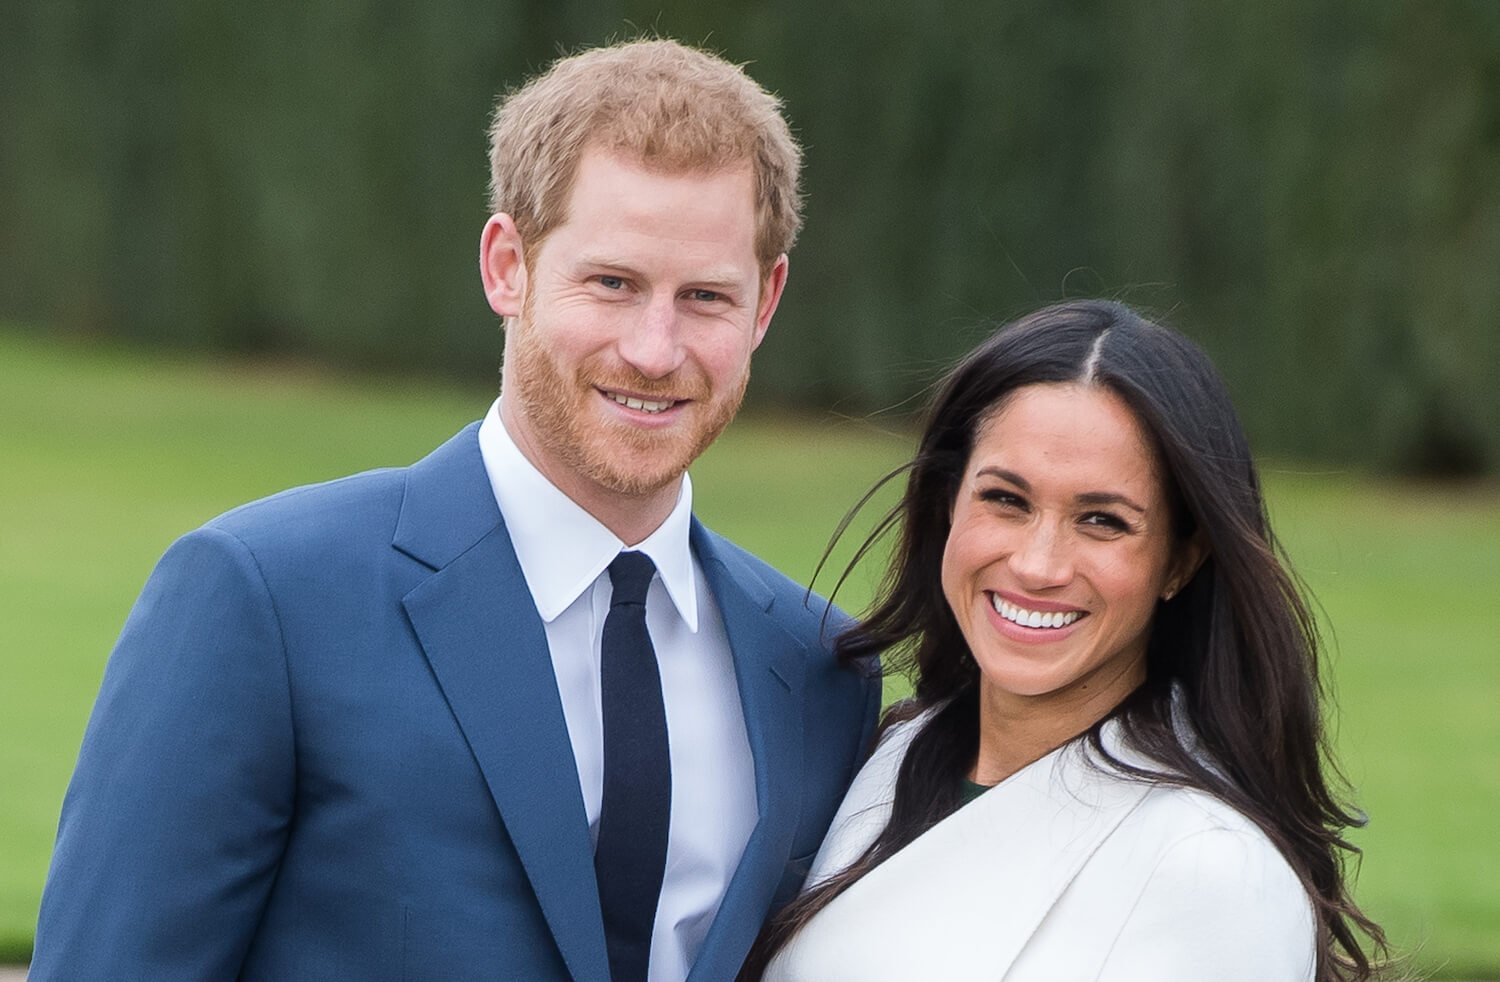 Prince Harry recalled his first date with Meghan Markle